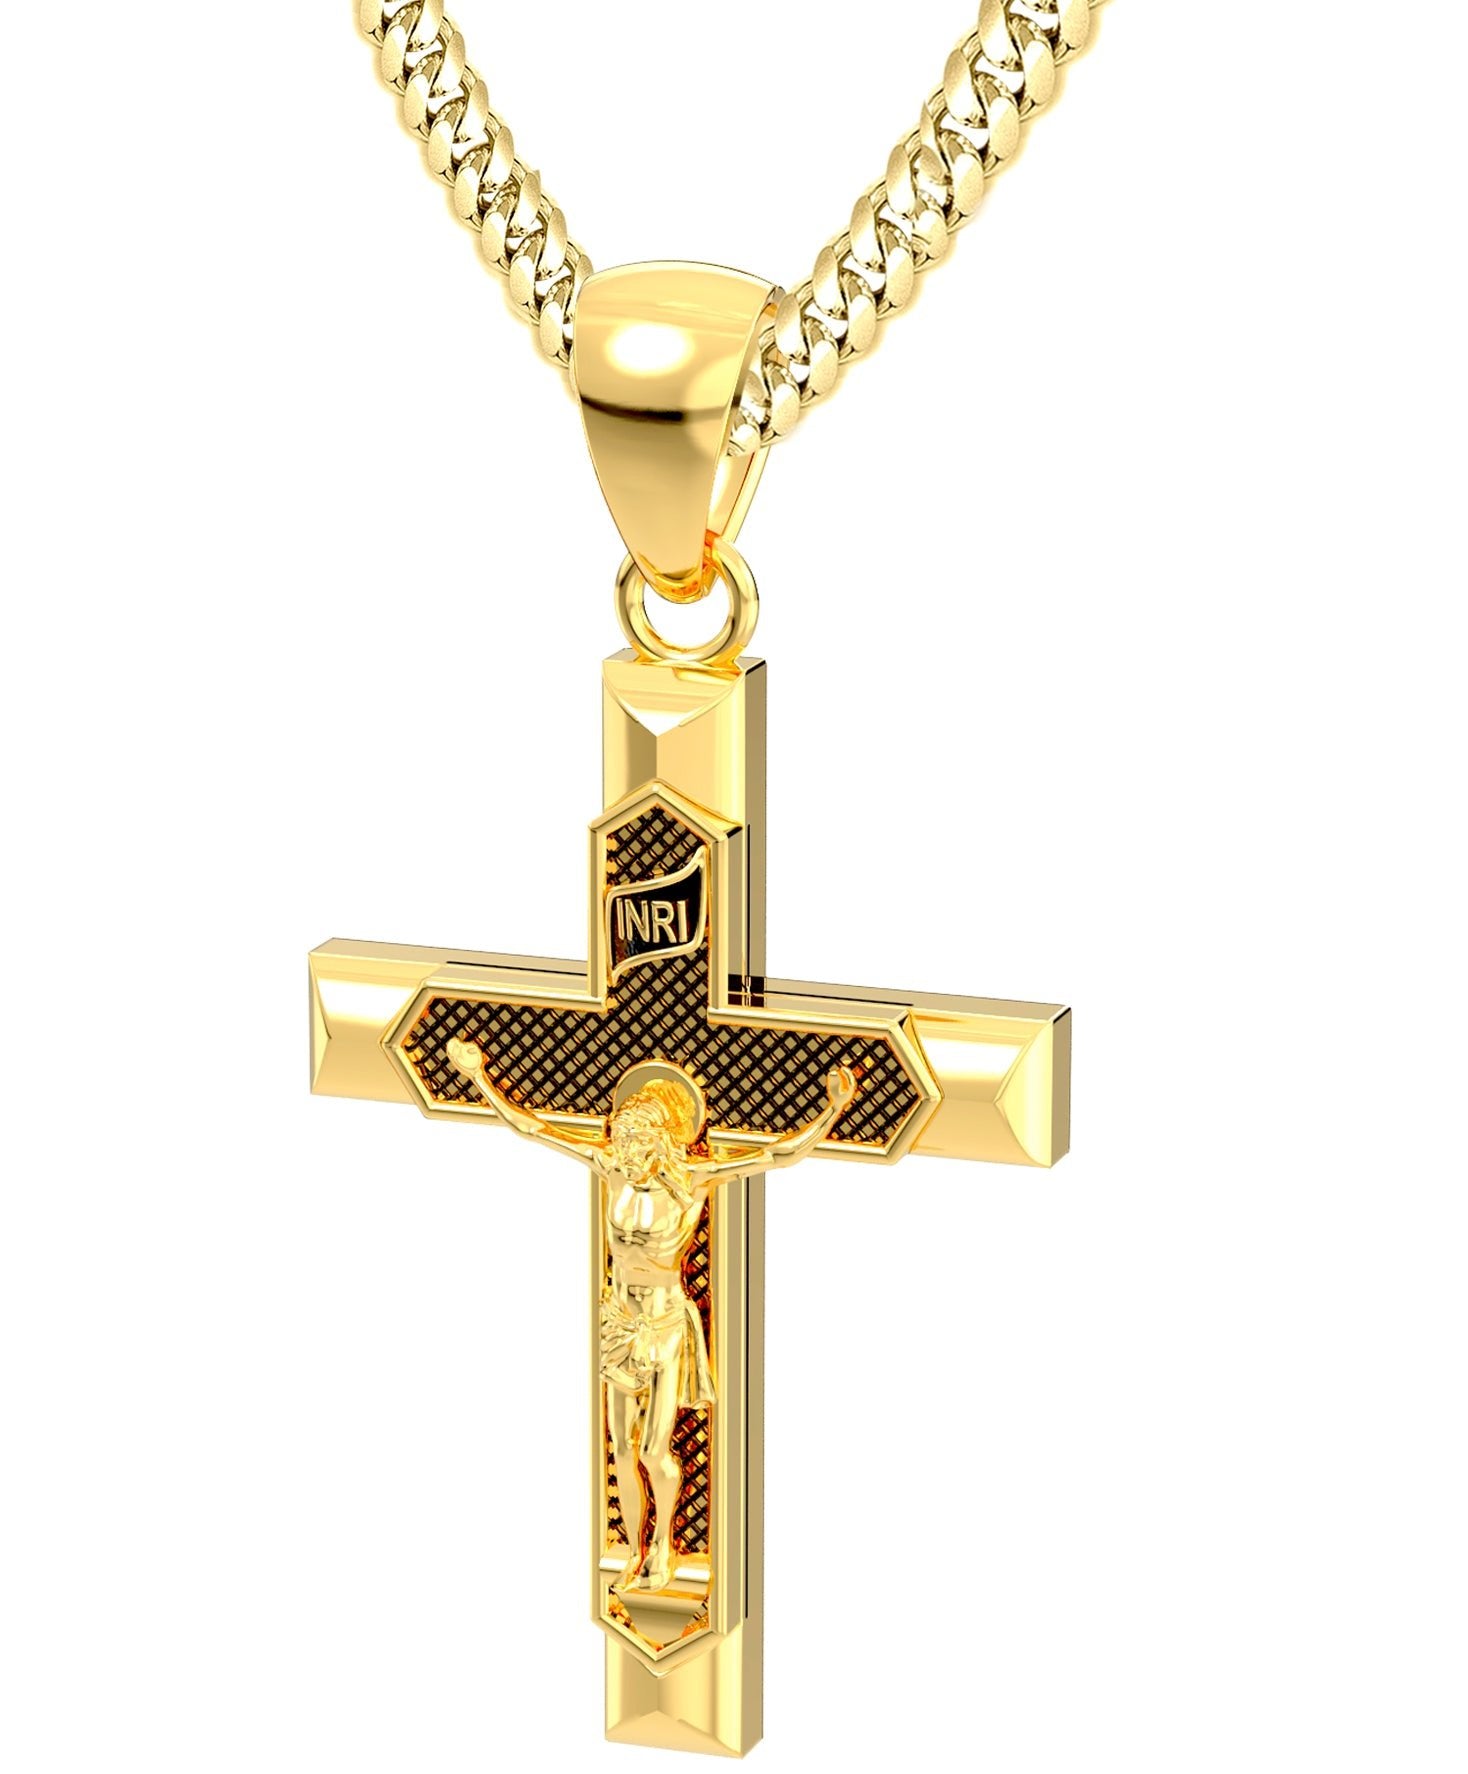 Men's Large Heavy Solid 14K Yellow Gold Crucifix Cross Pendant Necklace, 43mm - US Jewels